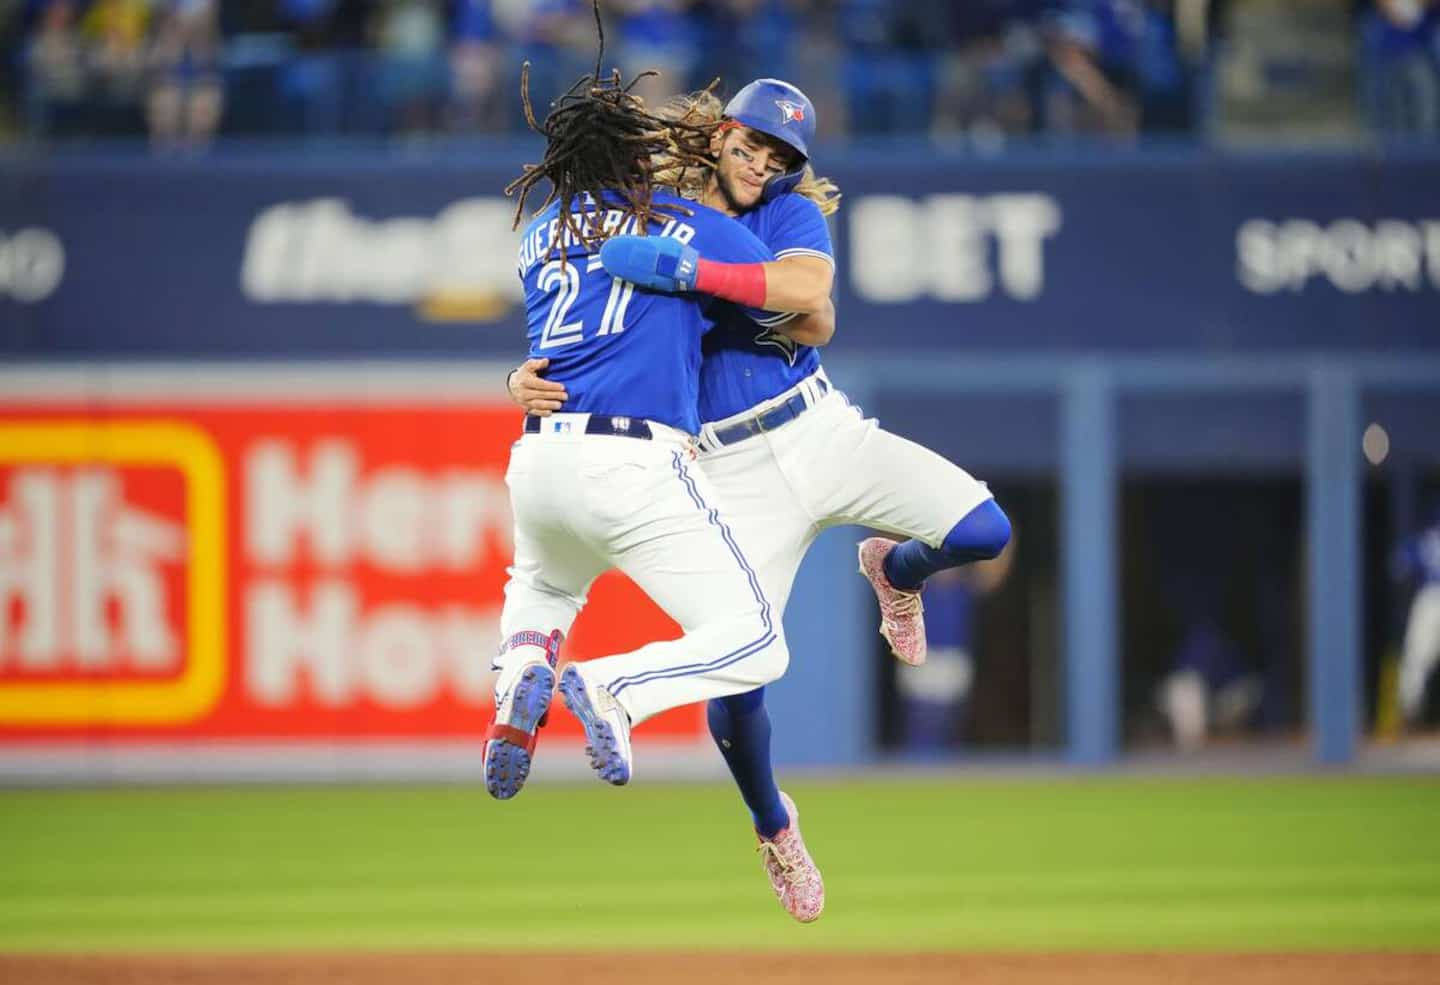 The Blue Jays win in extremis